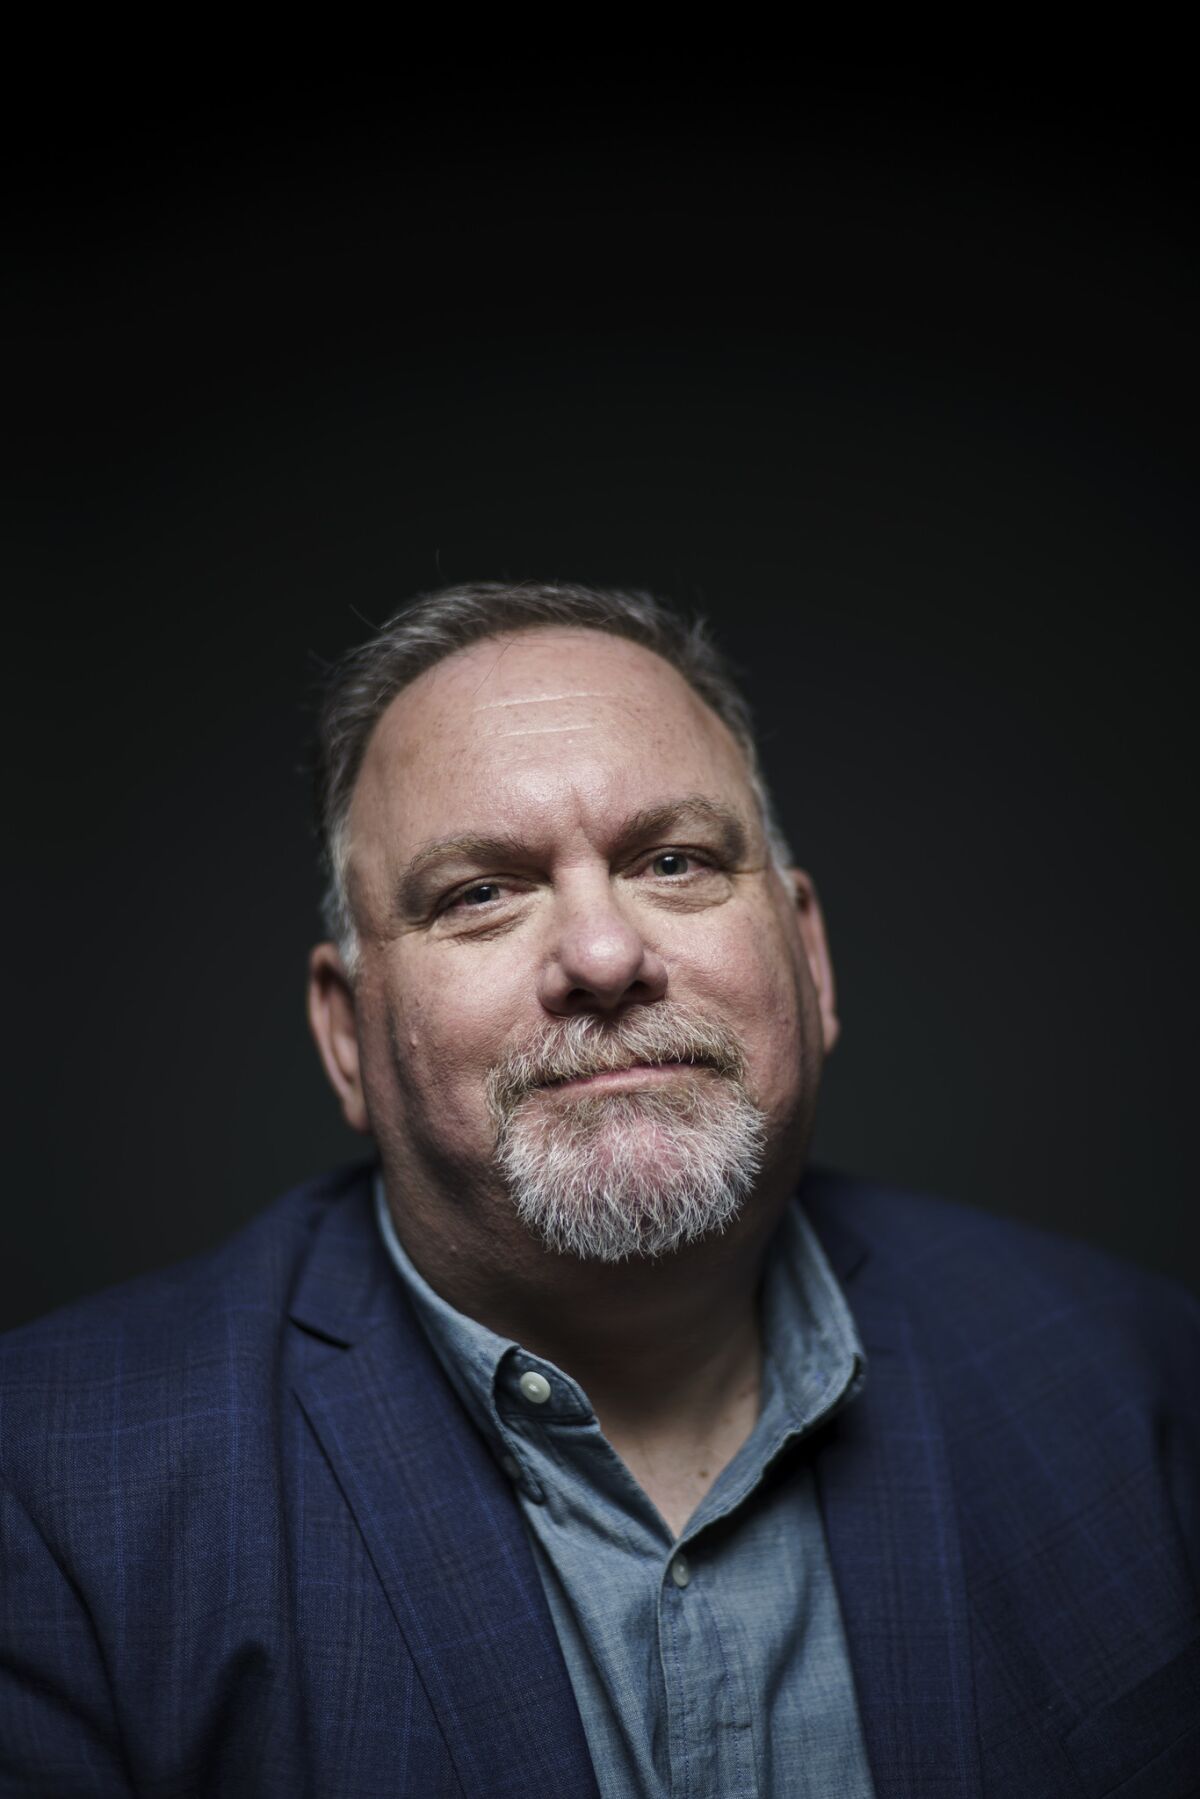 Bruce Miller, the showrunner behind "The Handmaid's Tale," was tasked with moving the series past the novel on which it's based.